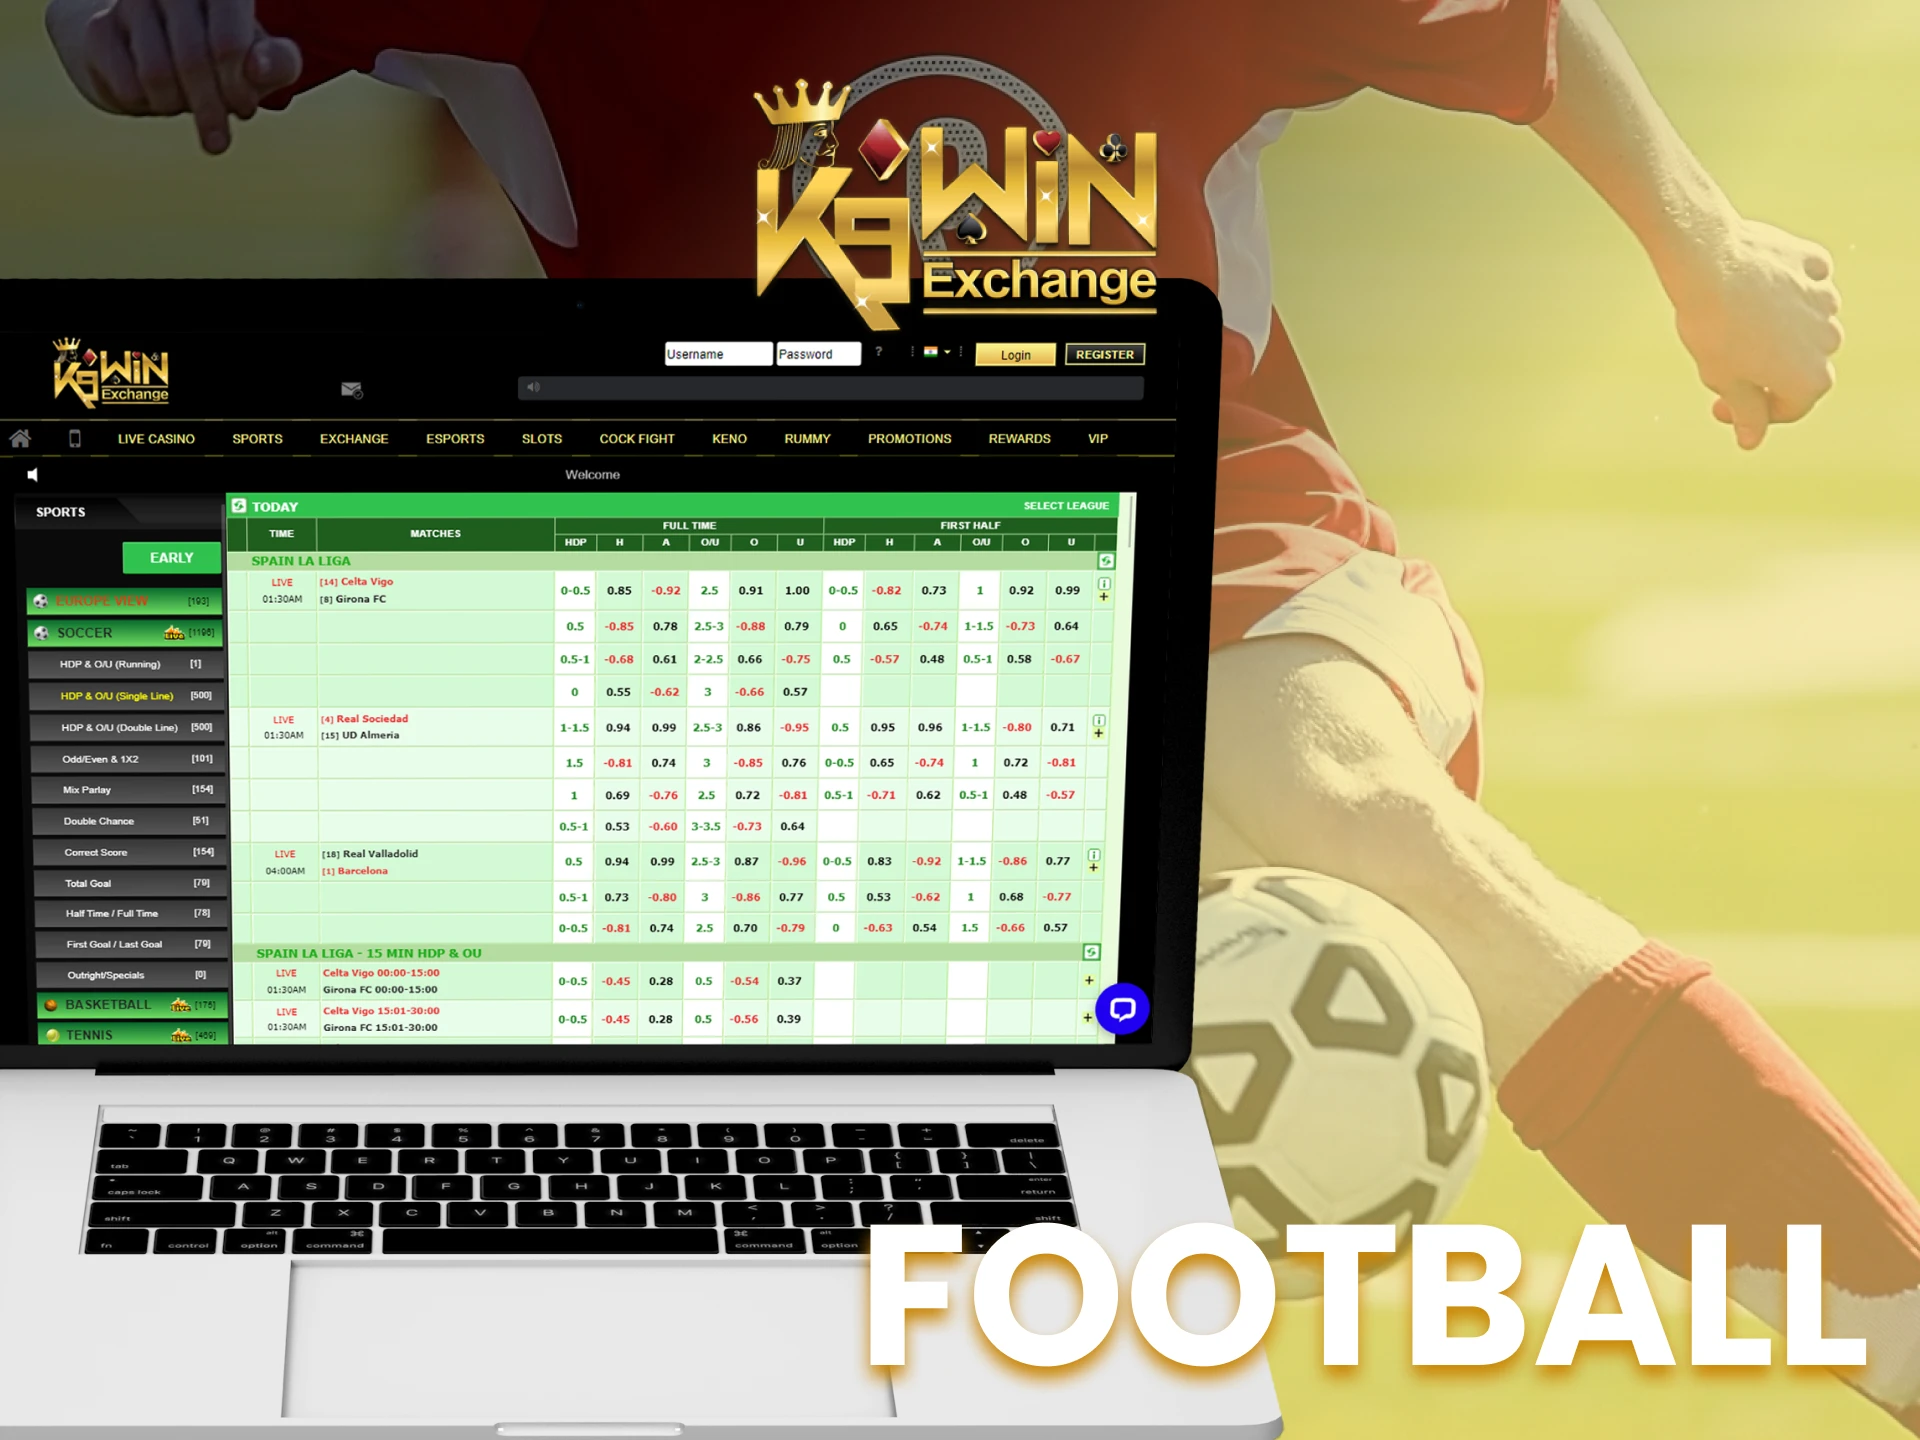 Win money by making bets on the football games at K9Win.